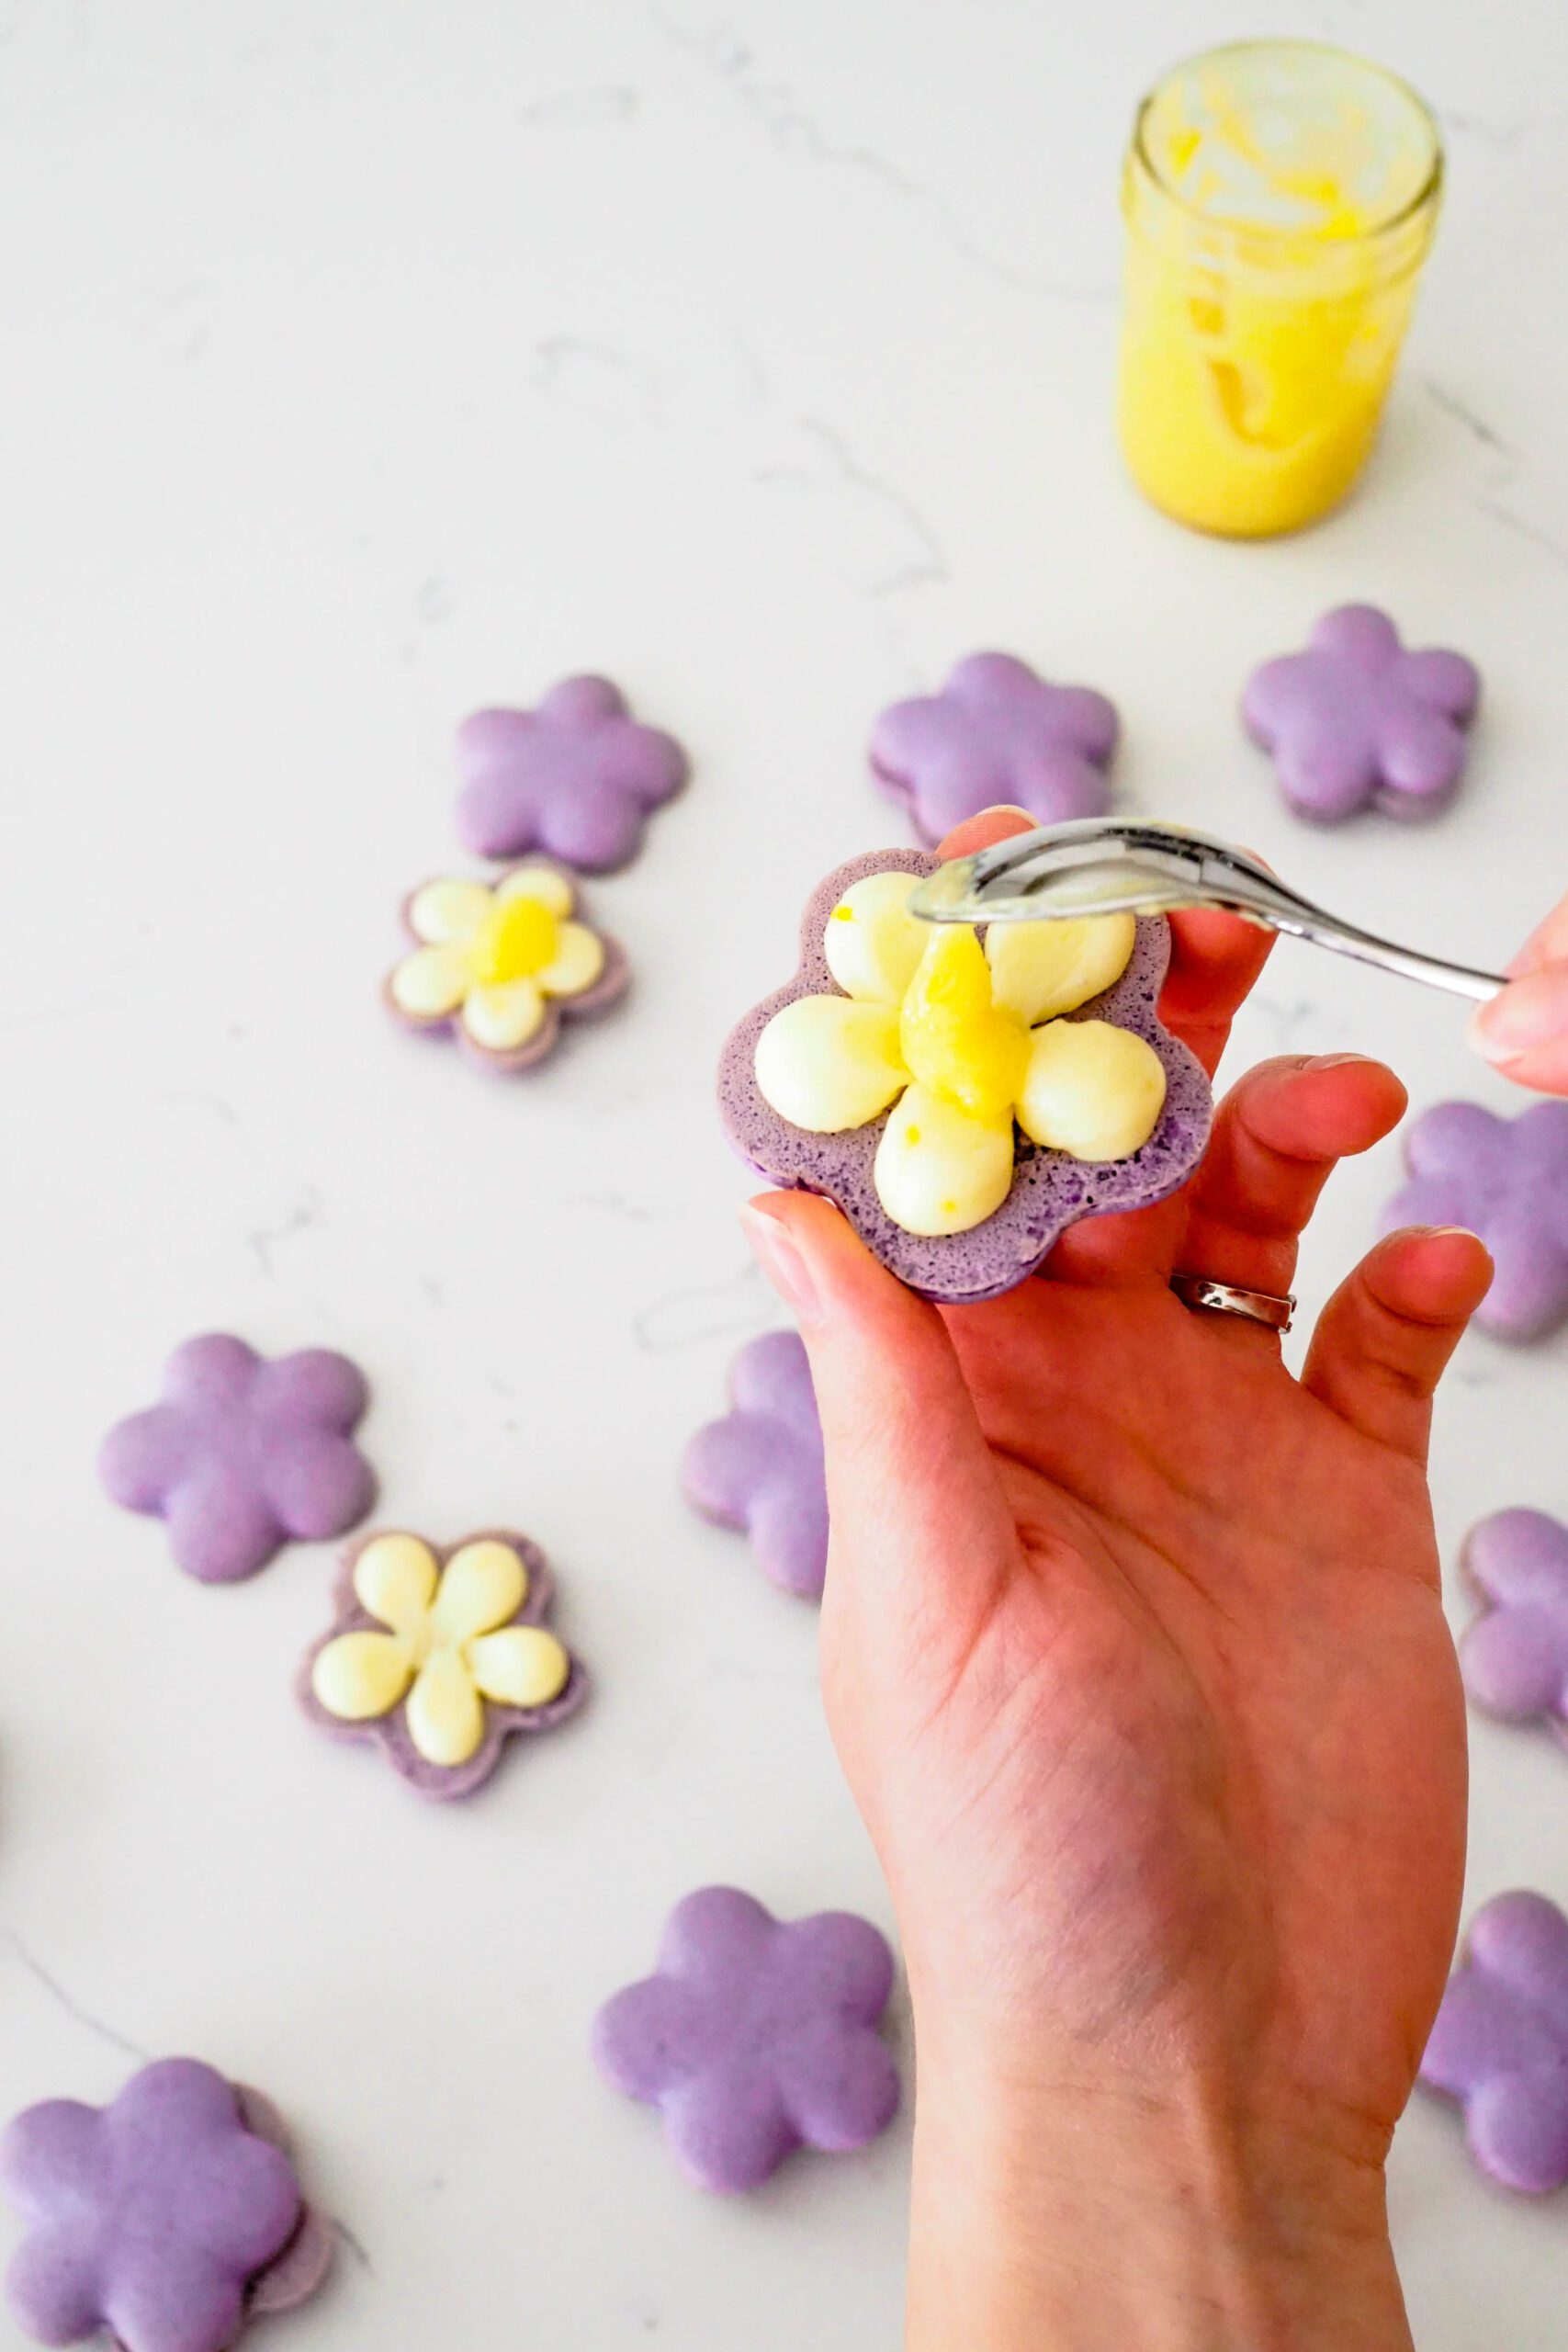 A small spoon adds a dollop of lemon curd to the center of a flower-shaped lemon lavender macaron.